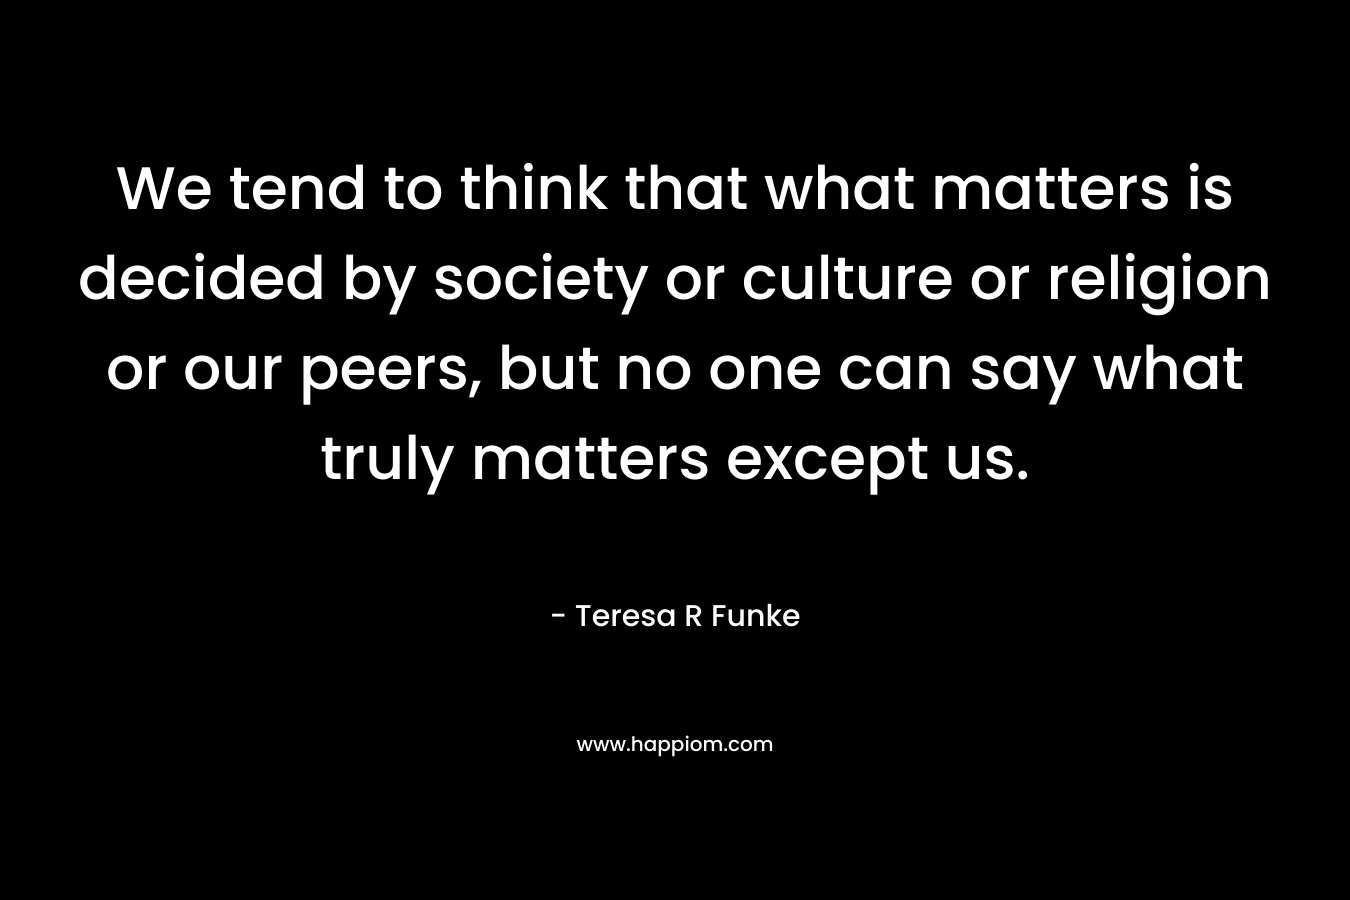 We tend to think that what matters is decided by society or culture or religion or our peers, but no one can say what truly matters except us.